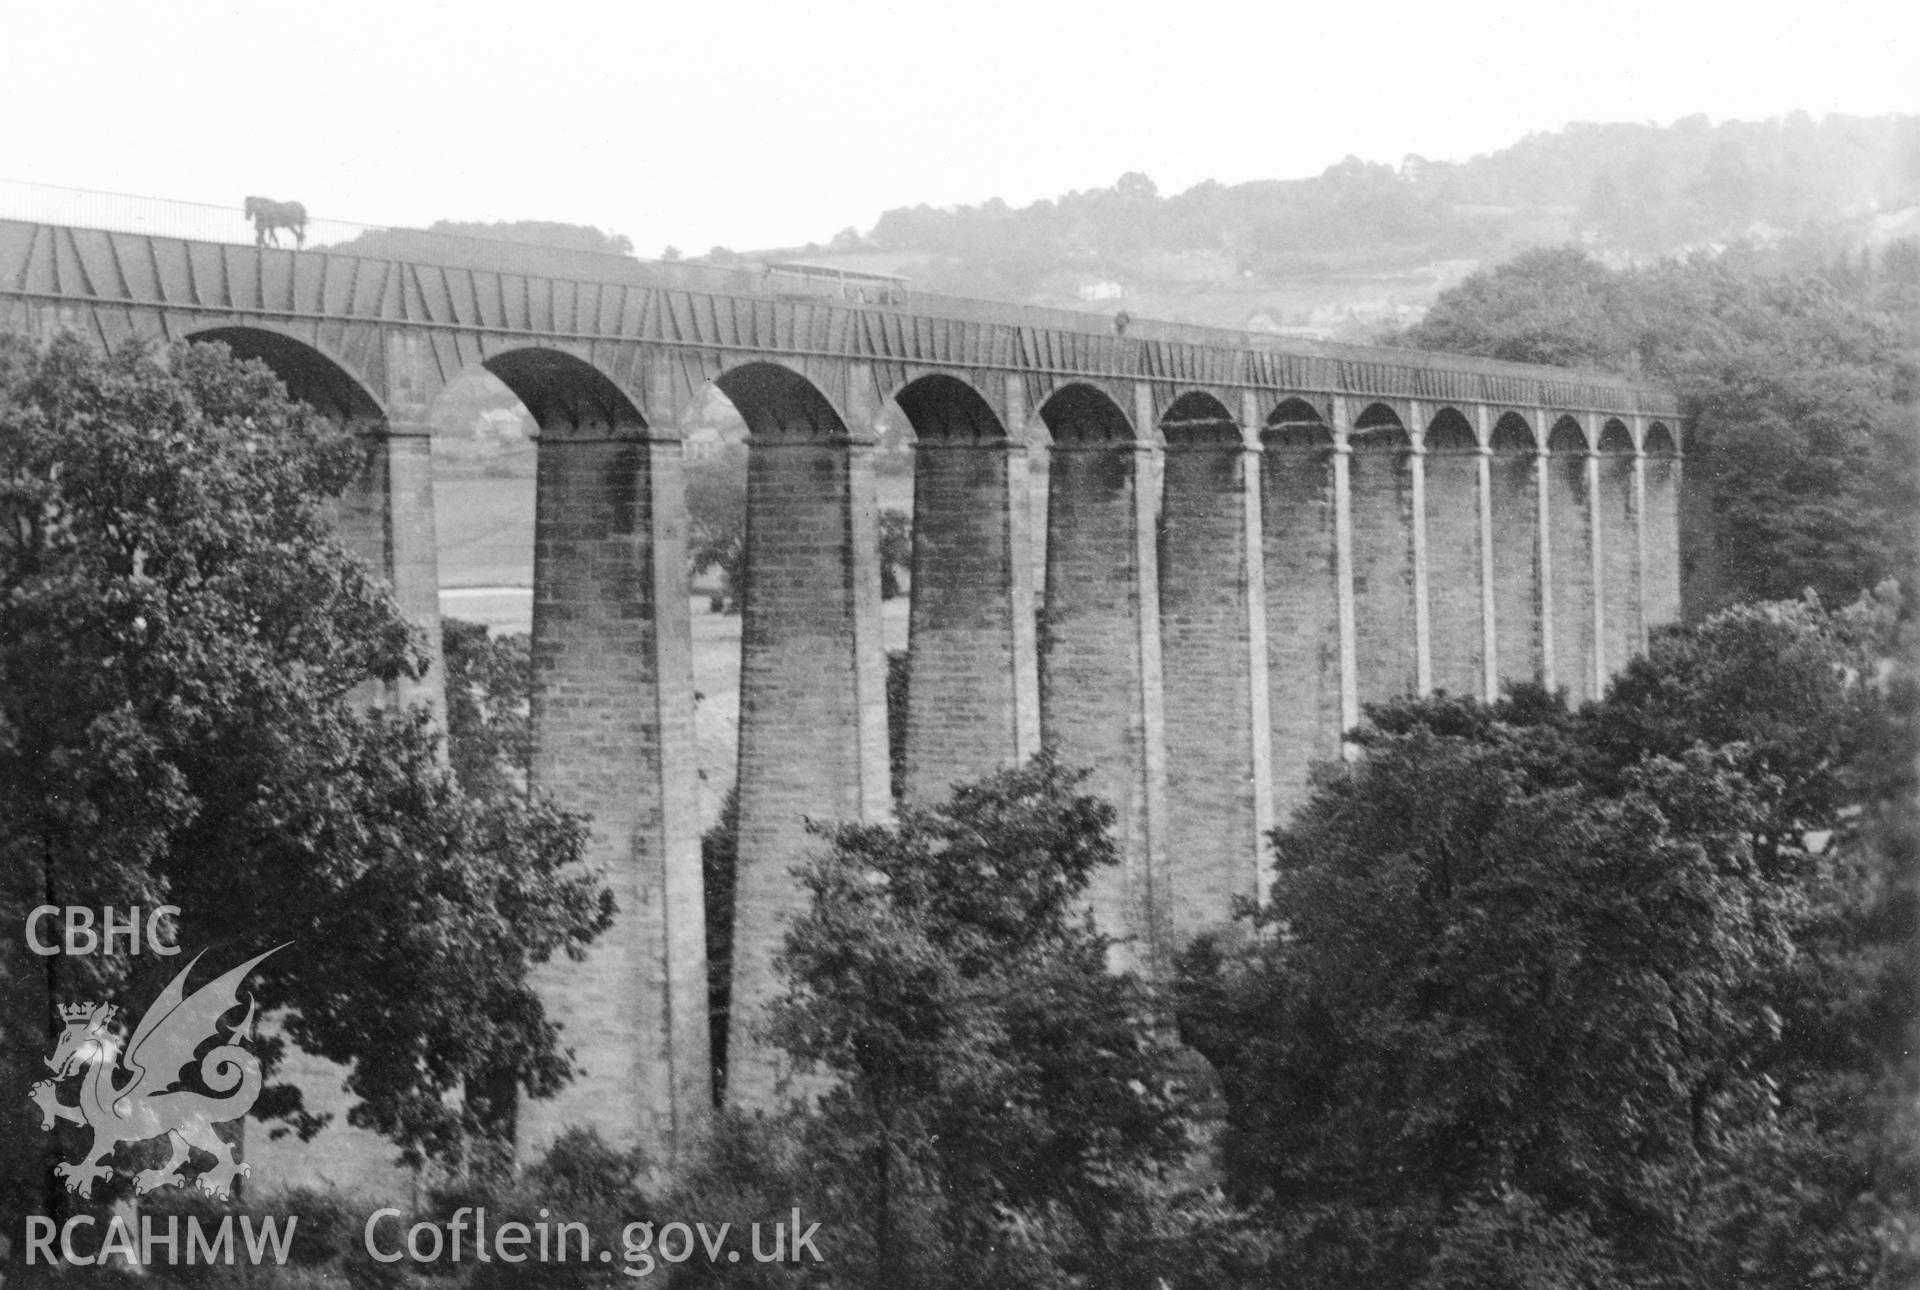 Pontcysyllte Aqueduct; digitized copy of a circa 1940 black and white photograph taken from a photo album loaned for copying by Anne Eastham.